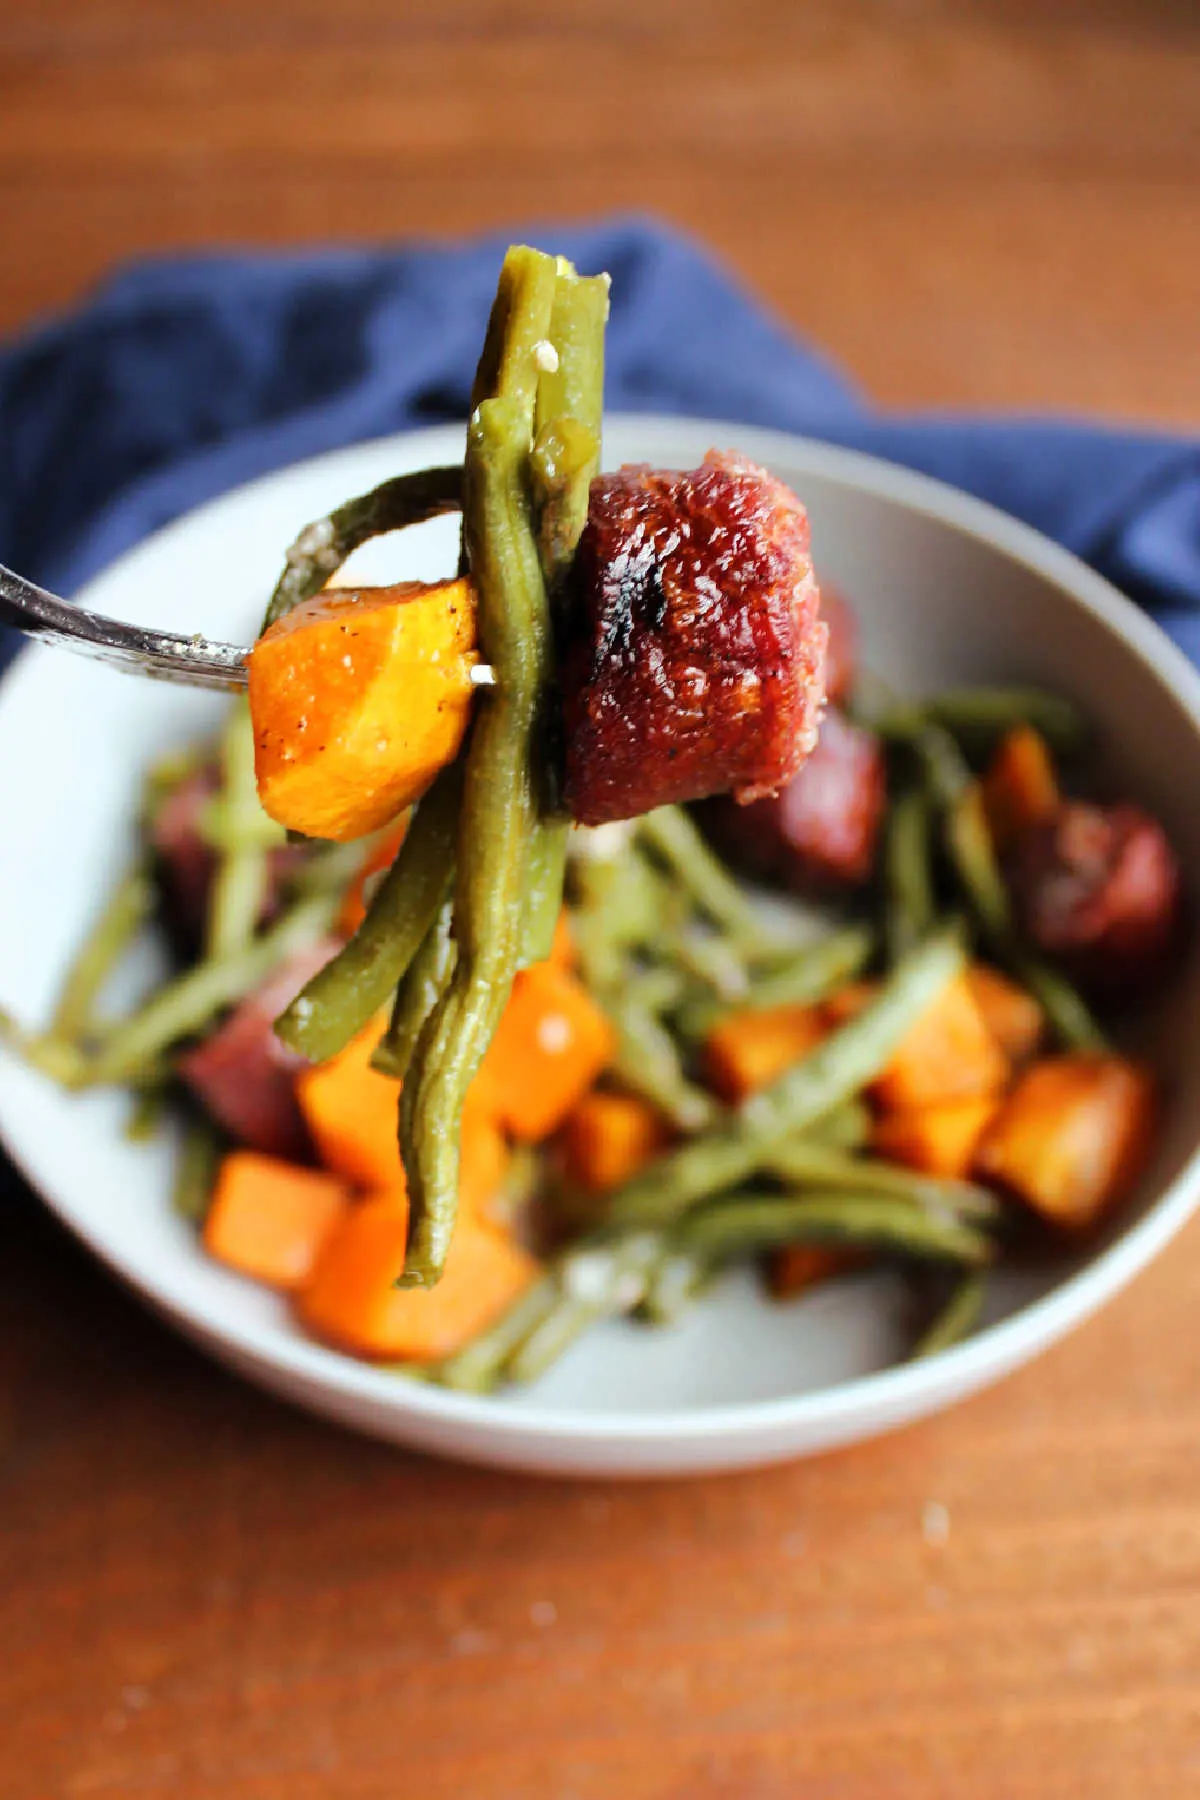 Bite of kielbasa, green beans and chunk of sweet potato on fork, showing roasted texture of each.